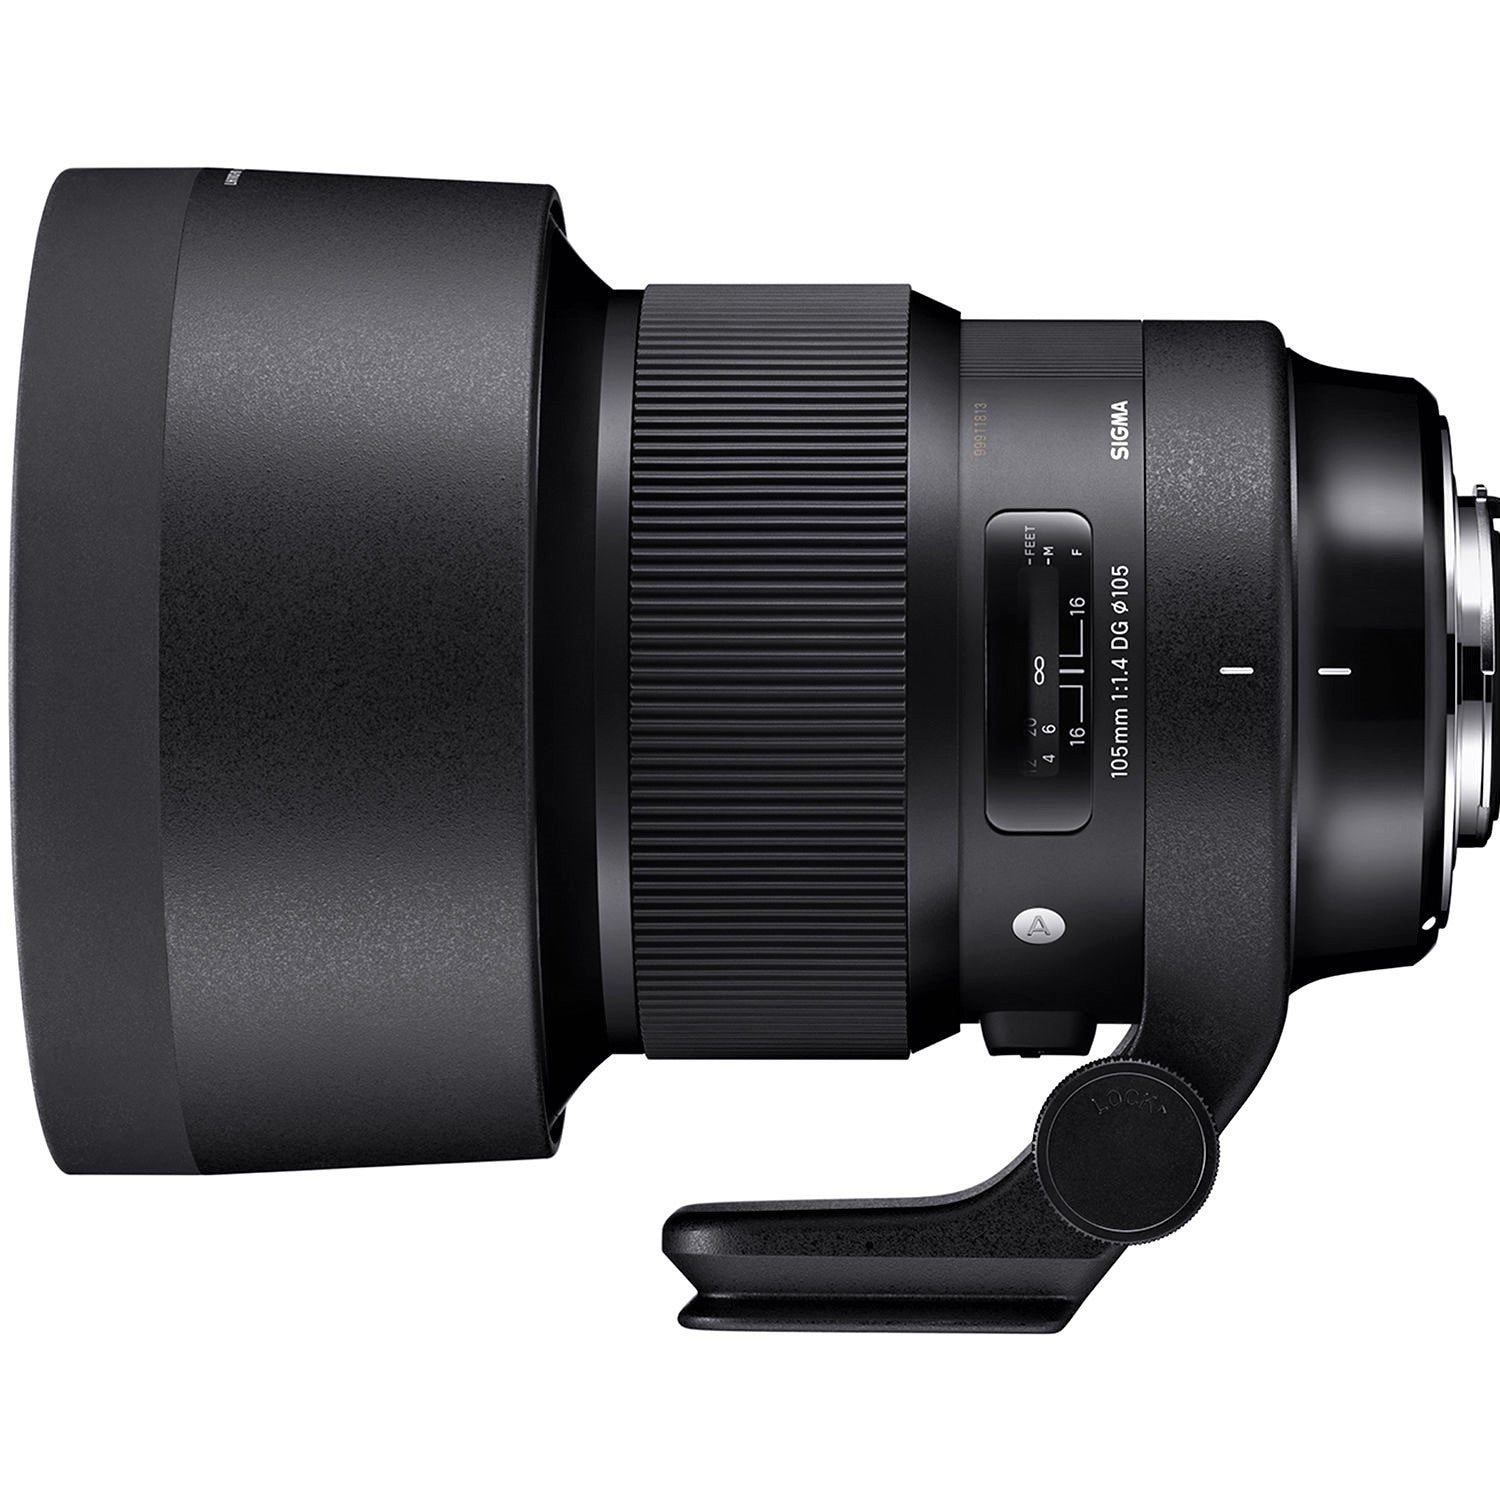 Sigma 105mm F1.4 DG HSM Art Lens for Leica L in a Side View